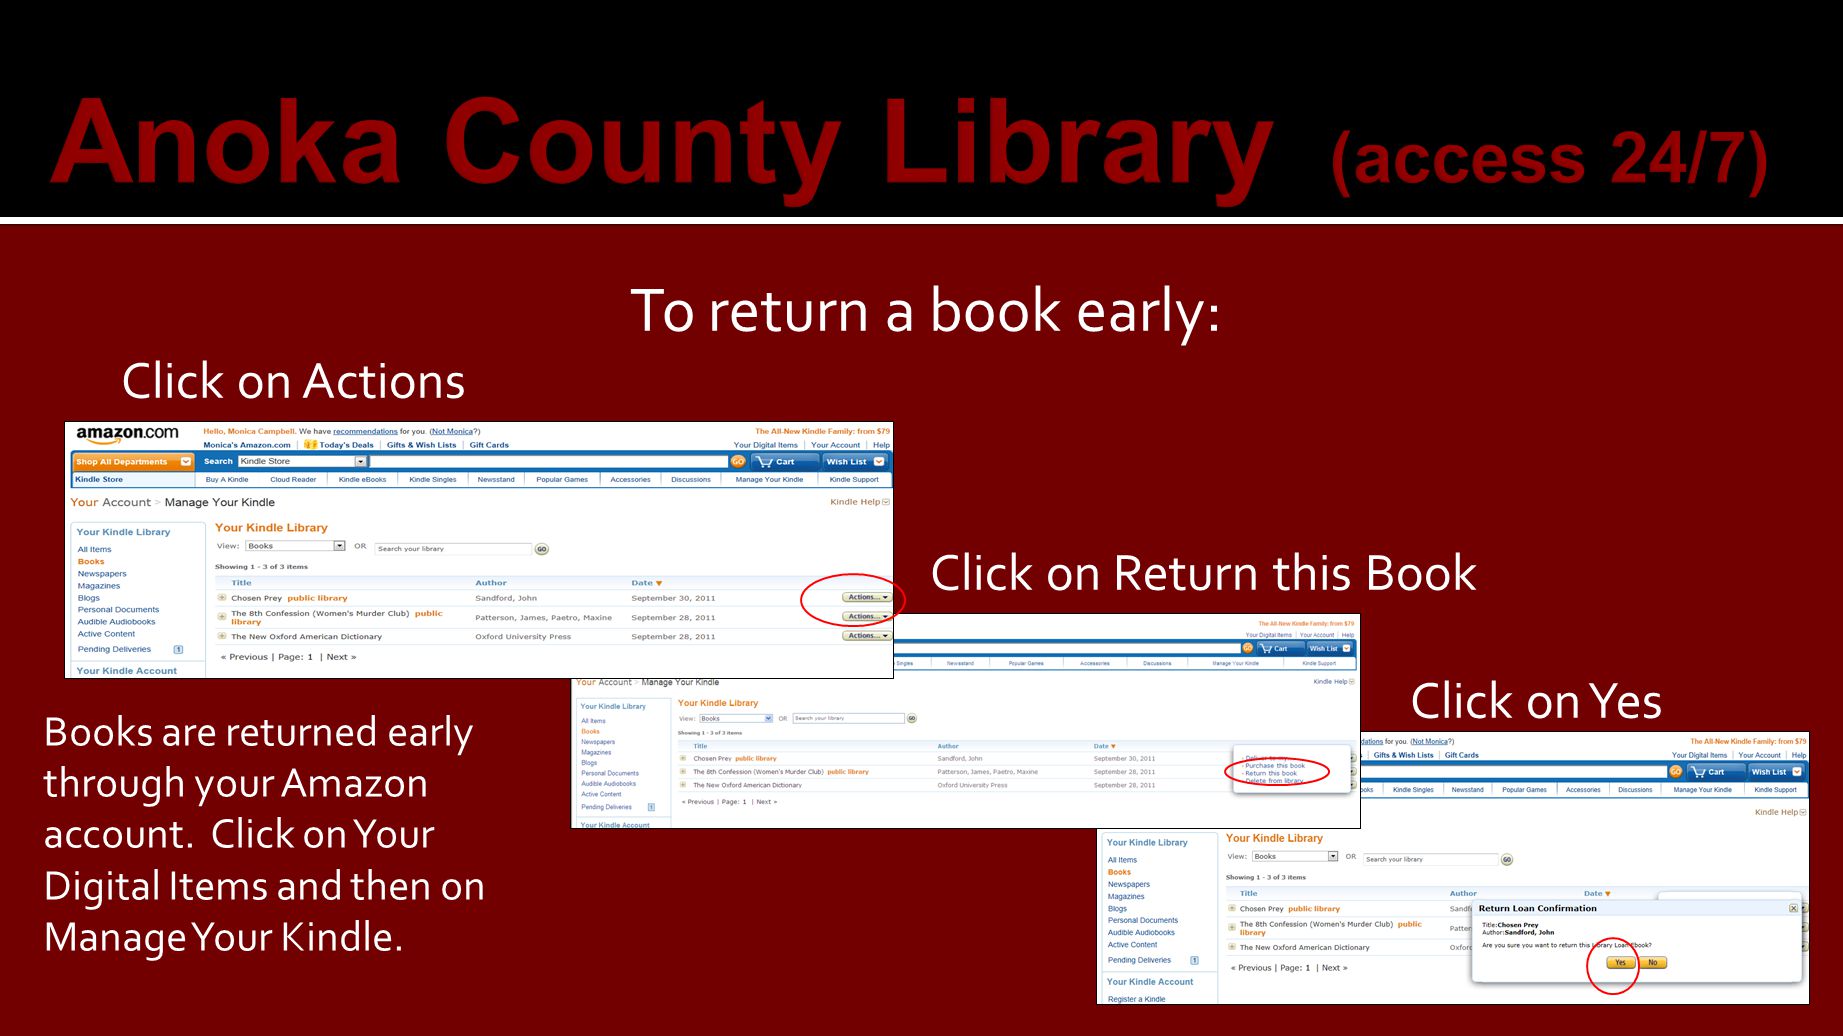 Anoka County Library (access 24/7) To return a book early: Click on Actions Click on Return this Book Click on Yes Books are returned early through your Amazon account.